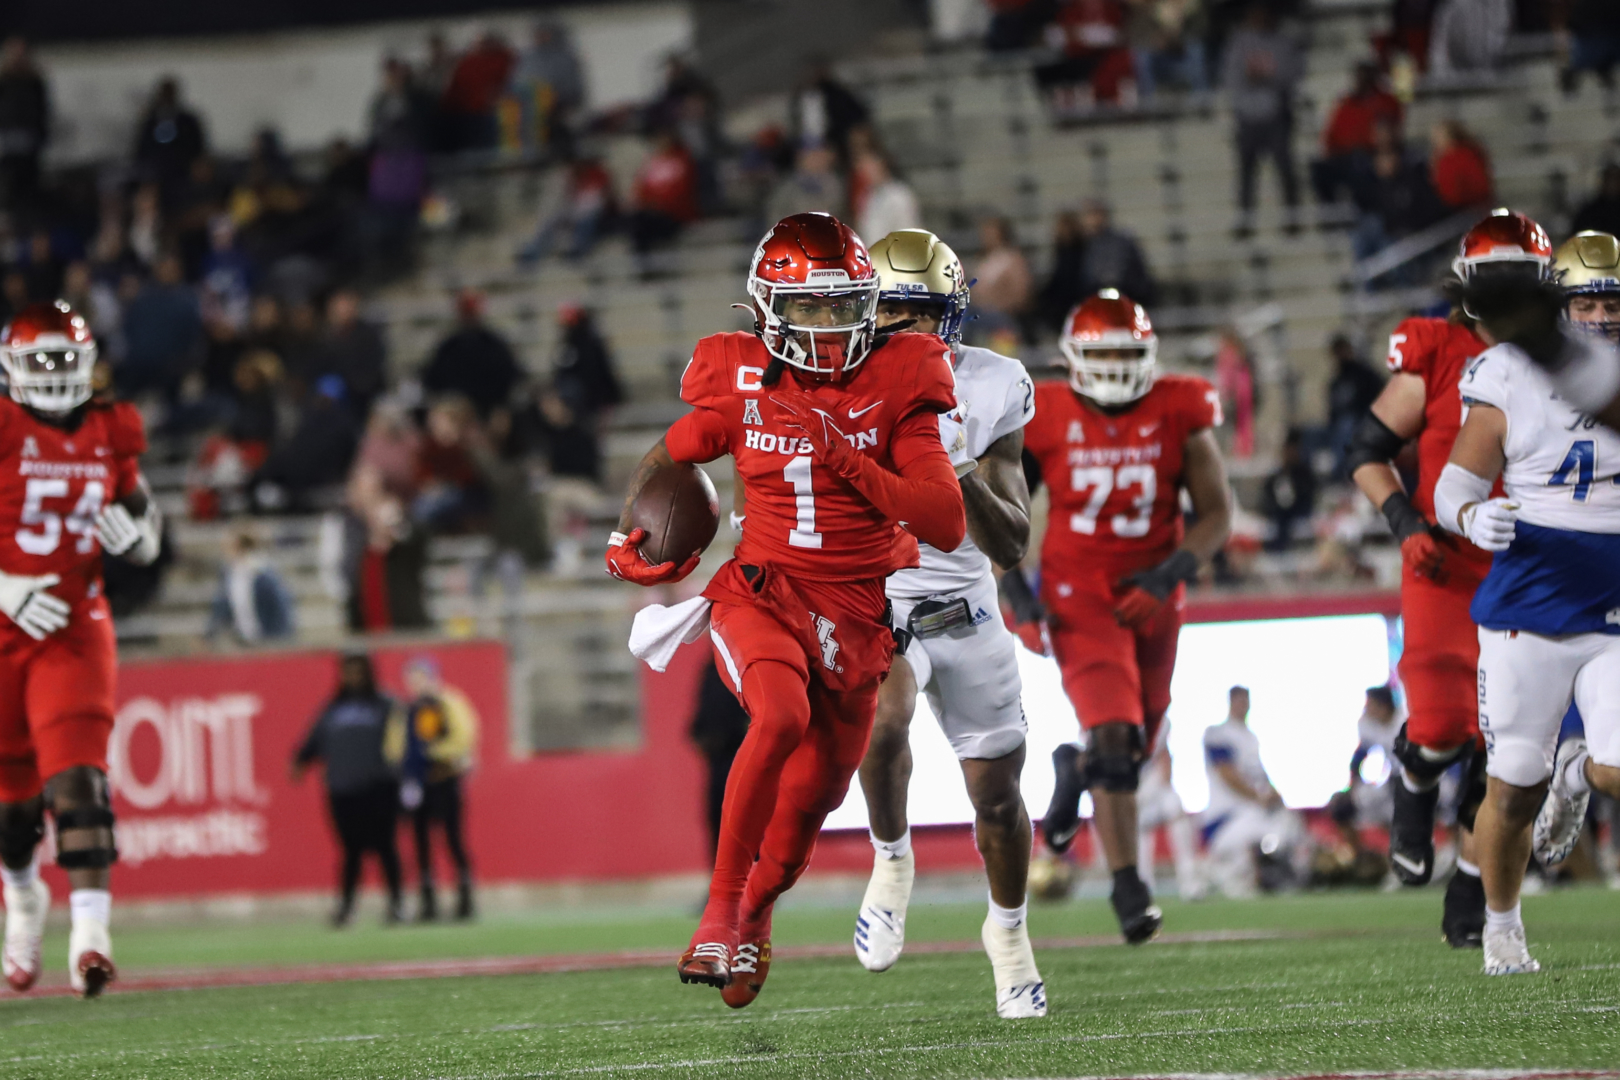 UH football receiver Nathaniel "Tank" Dell is one of many Cougars who will be playing in their last collegiate game on Friday in the Independence Bowl . | Sean Thomas/The Cougar